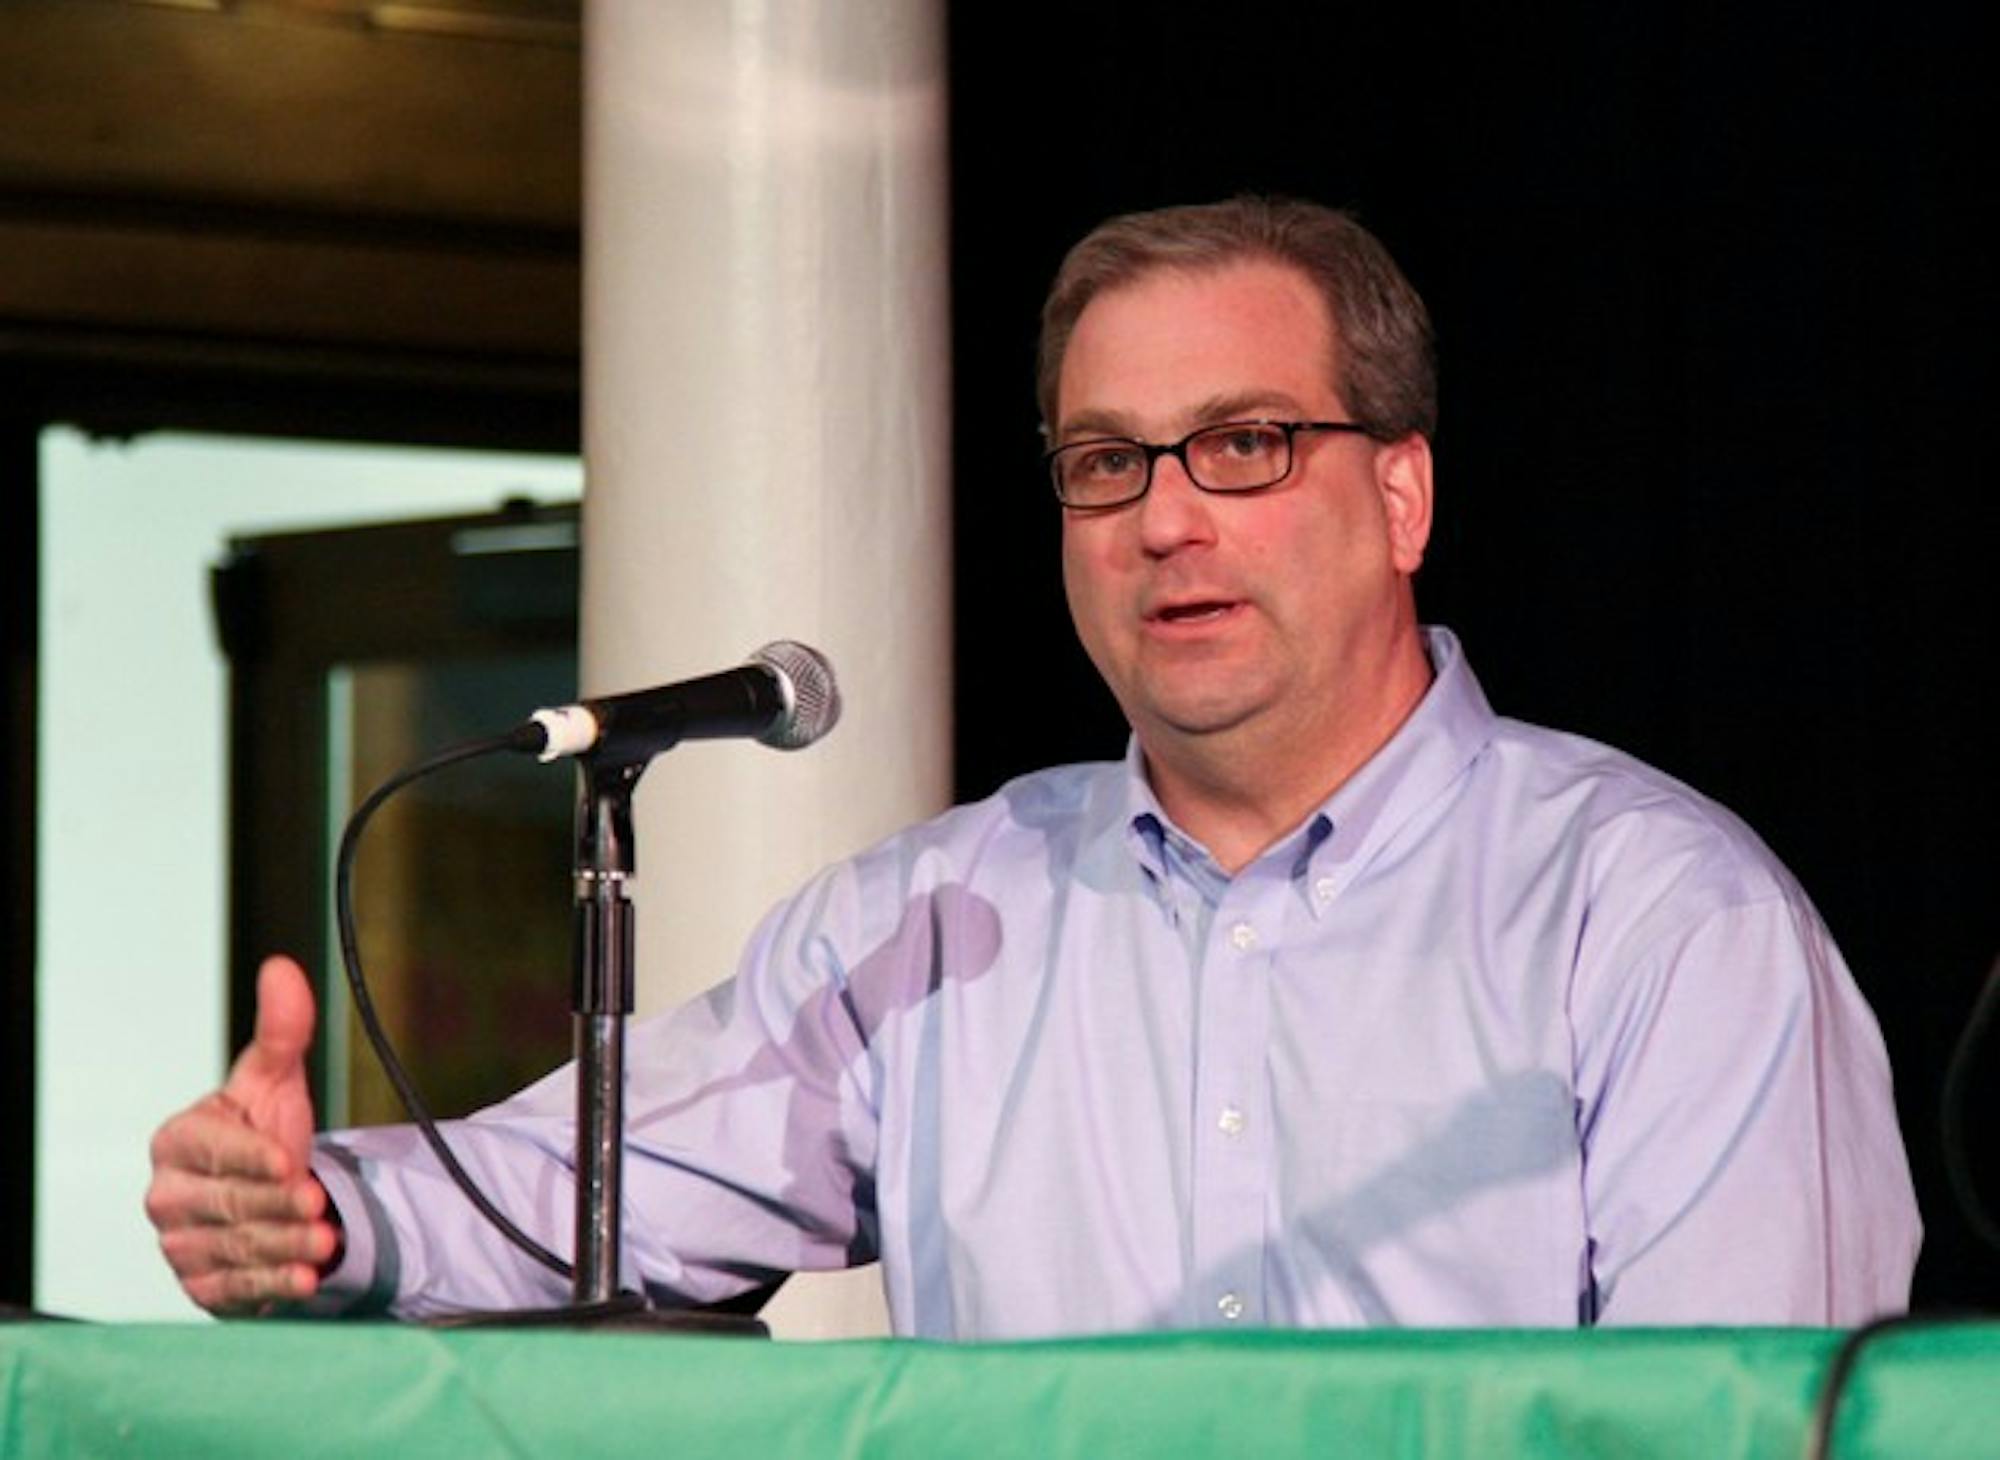 In an interview with The Dartmouth, Crady said he is currently looking for input from the Dartmouth community before finalizing the proposal, which will not go into effect until the Spring term, at the earliest.